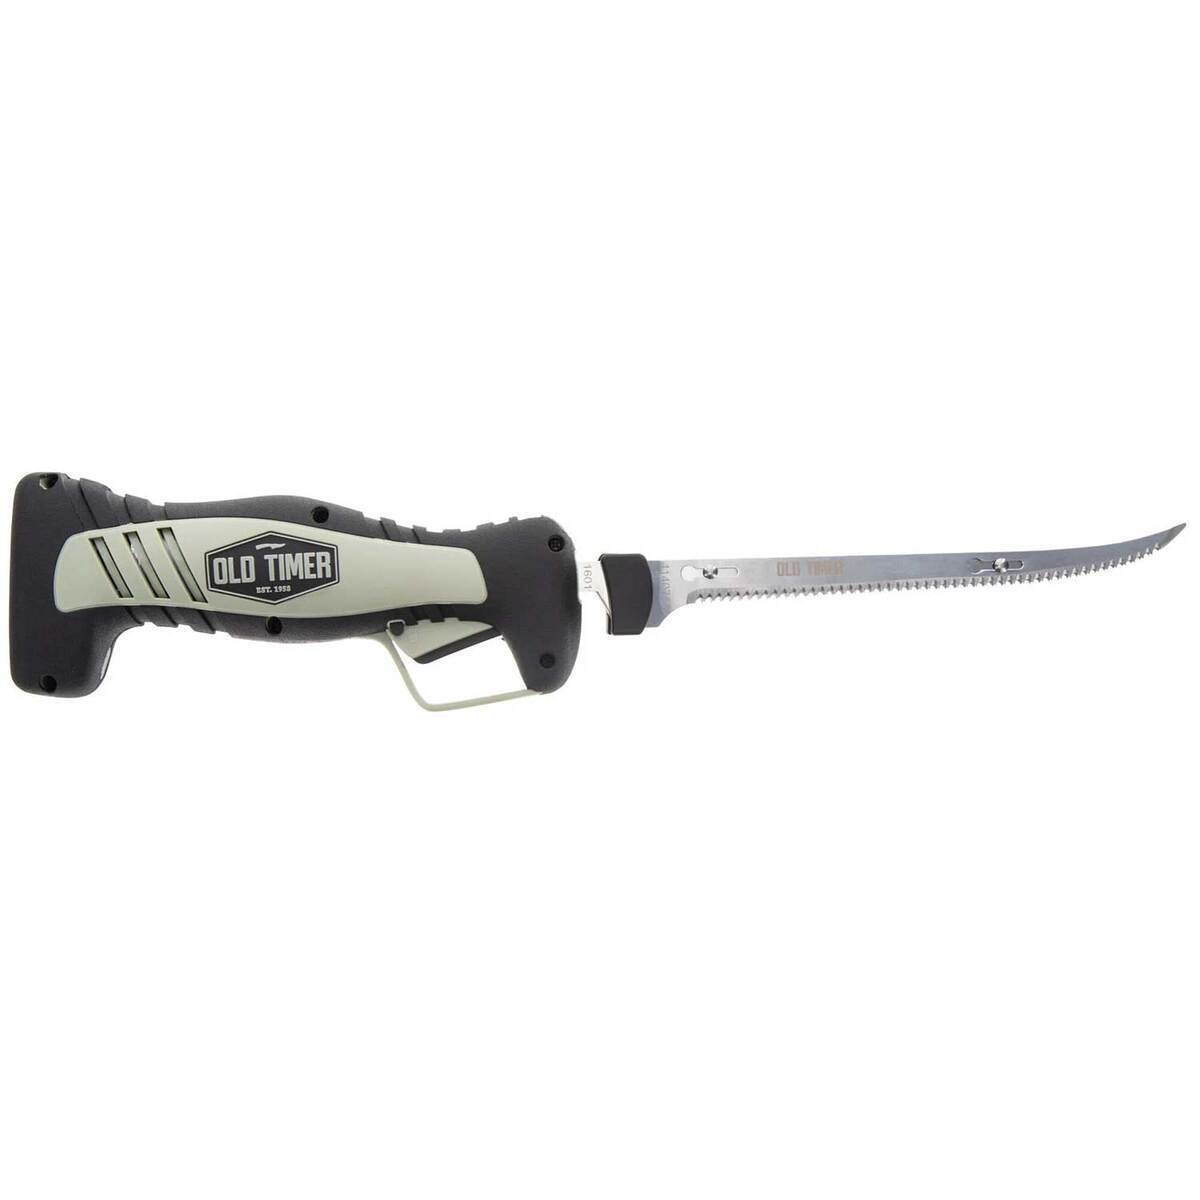 Bubba Pro series lithium electric knife